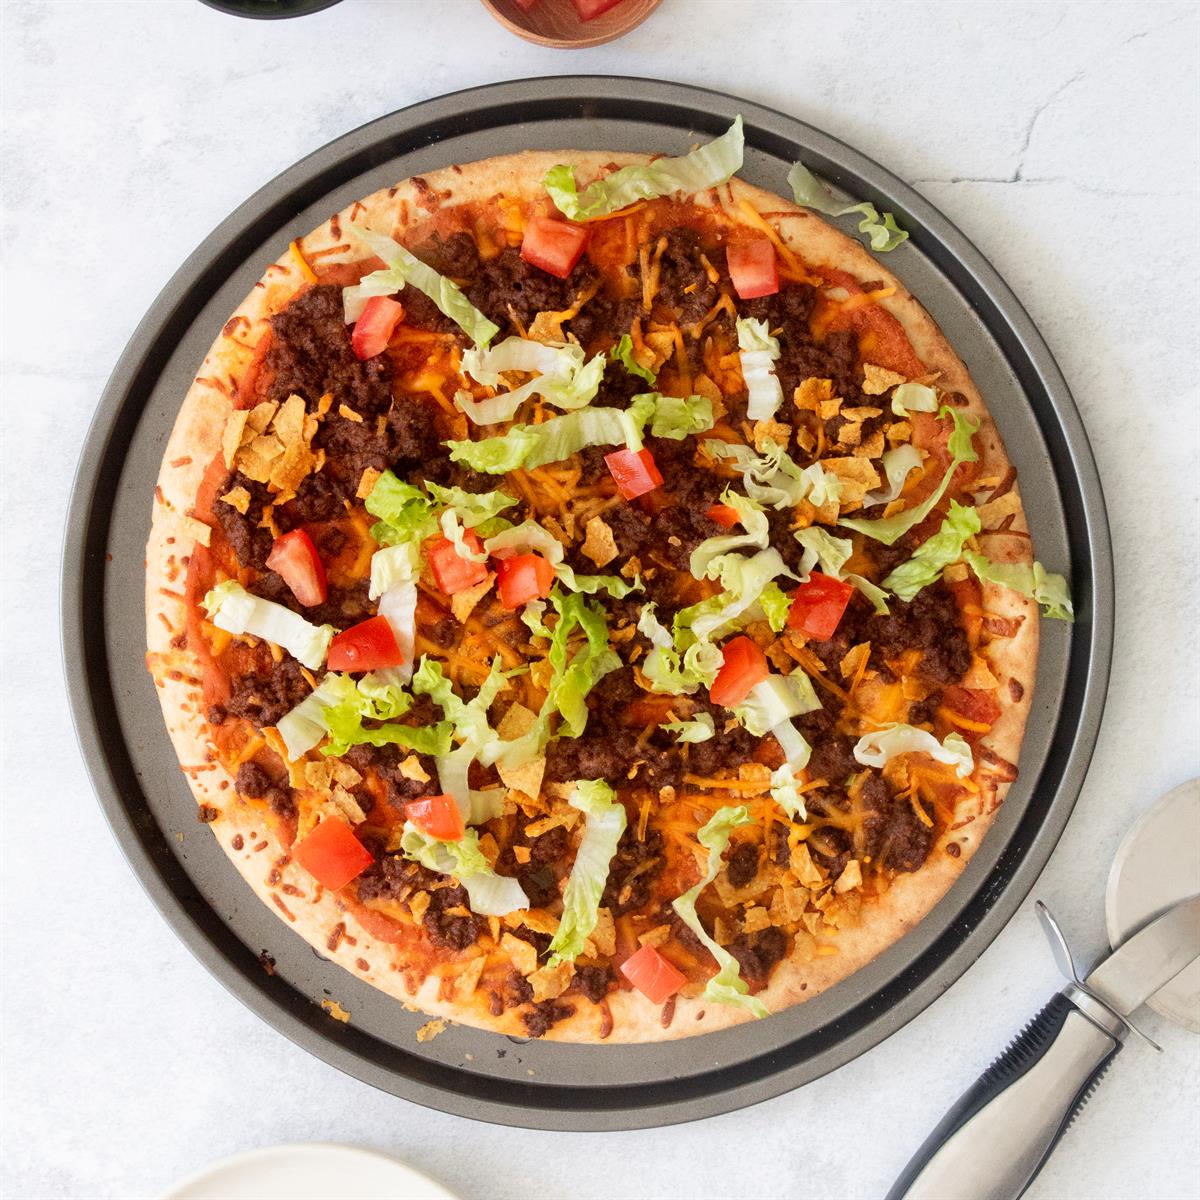 Convenient prebaked crust makes this tasty taco pizza as easy as can be. It's a great recipe, especially if you have teenagers. I keep the ingredients on hand so that we can whip up this filling meal anytime. —Mary Cass, Baltimore, Maryland <a href="https://www.tasteofhome.com/recipes/easy-taco-pizza/">Get Recipe</a>